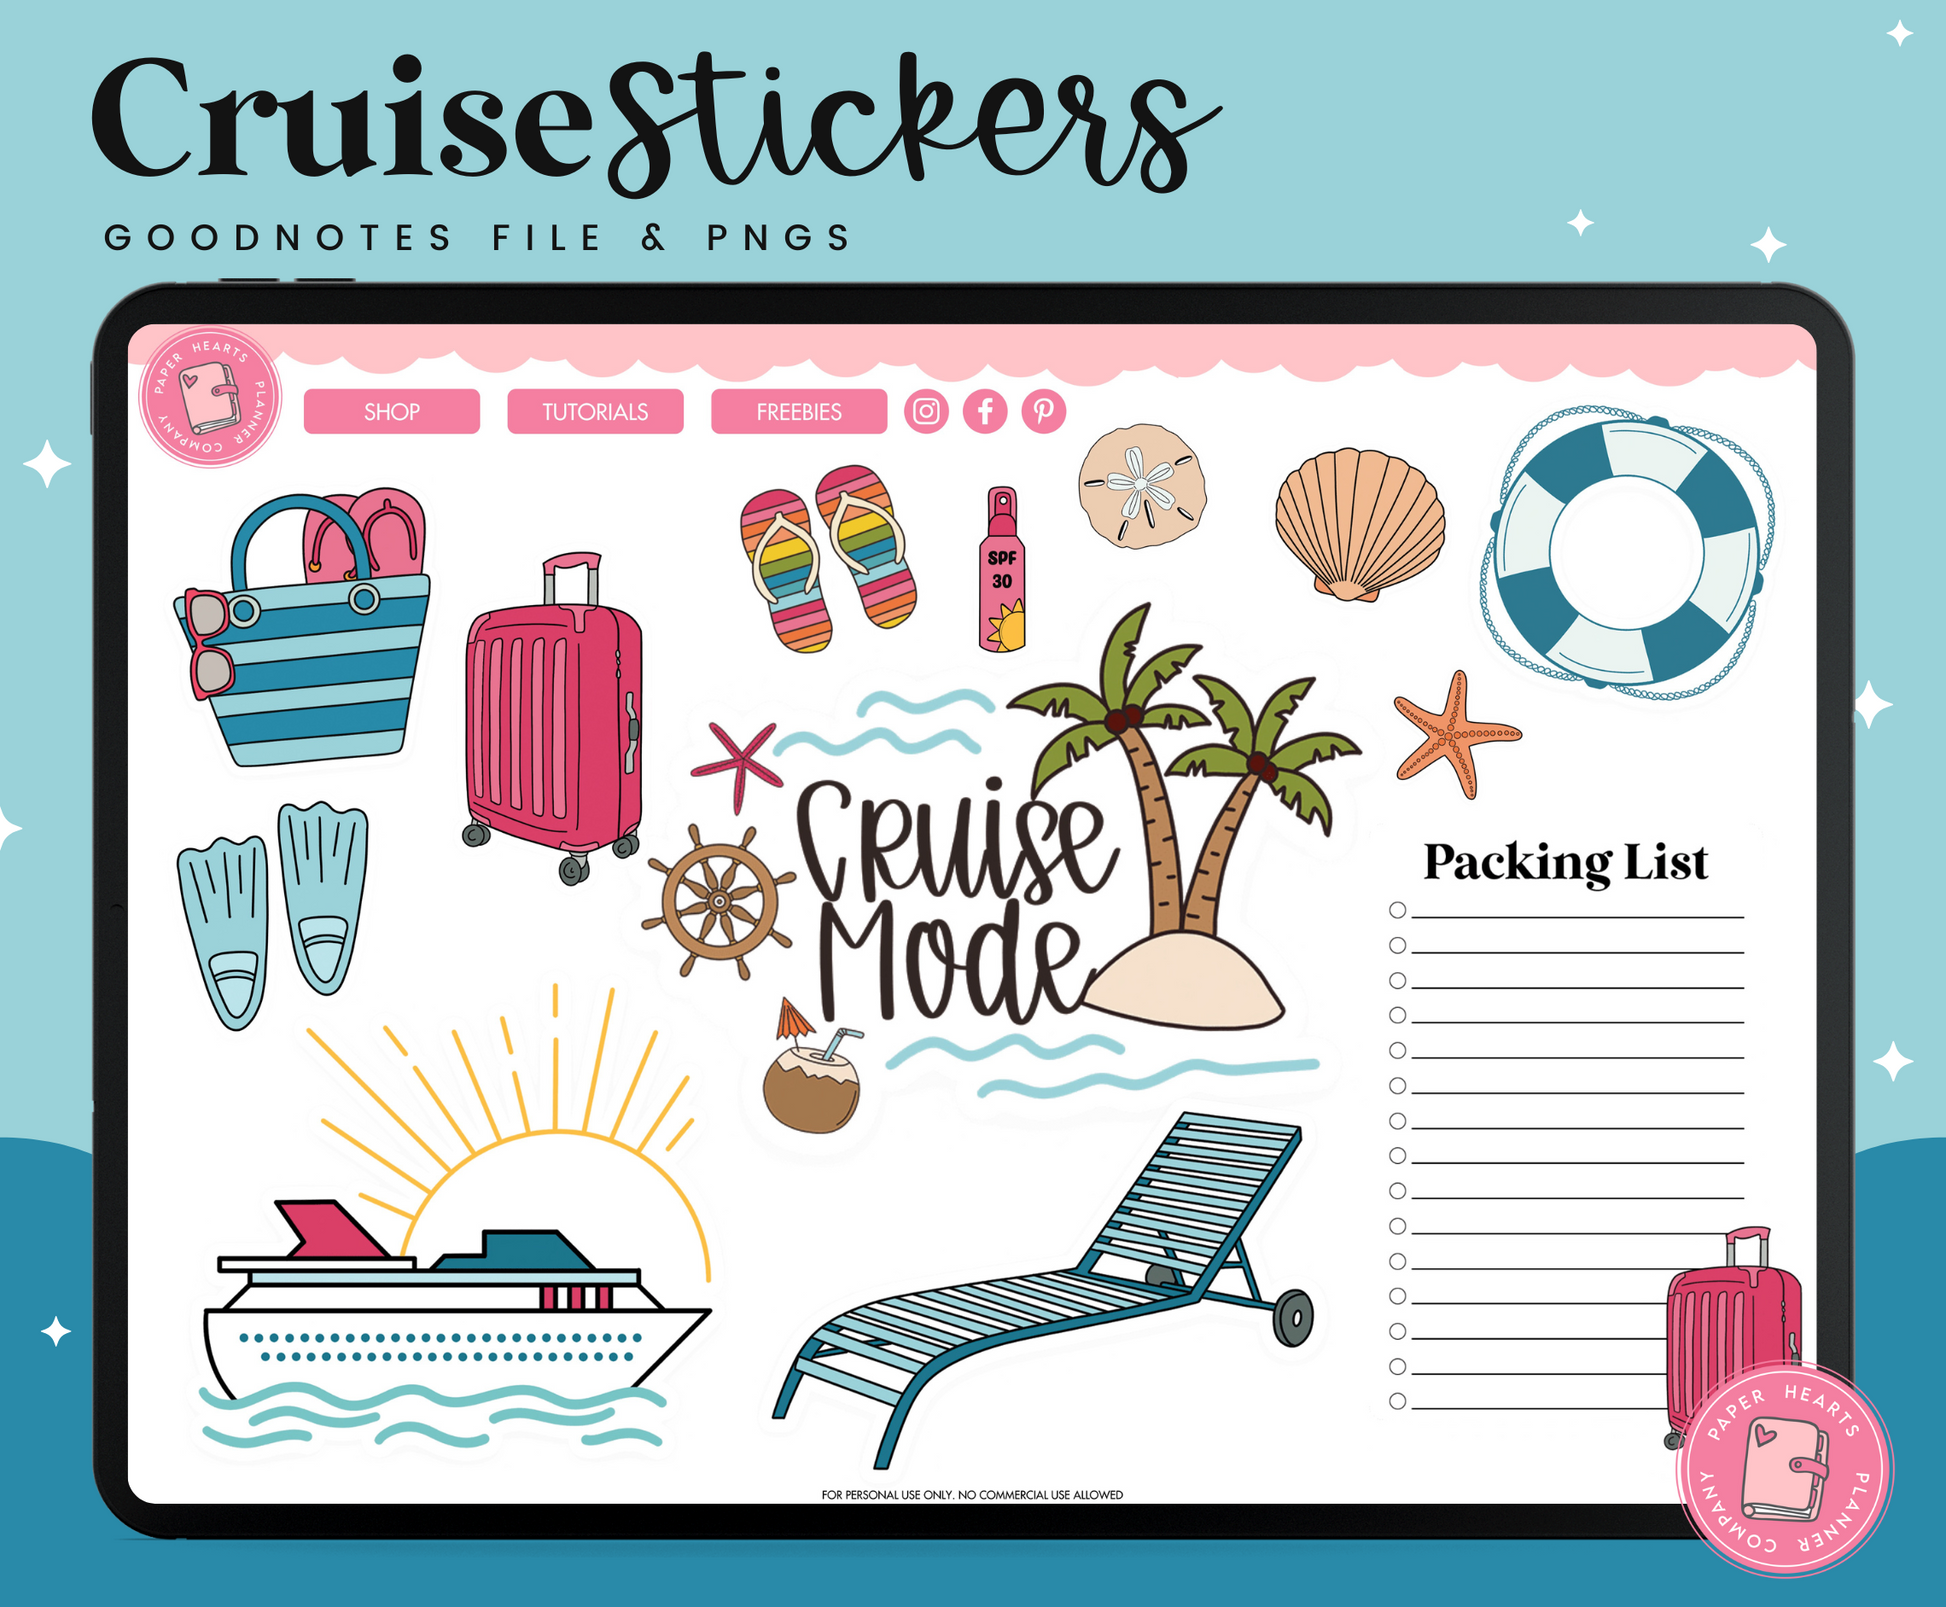 cruise planner stickers